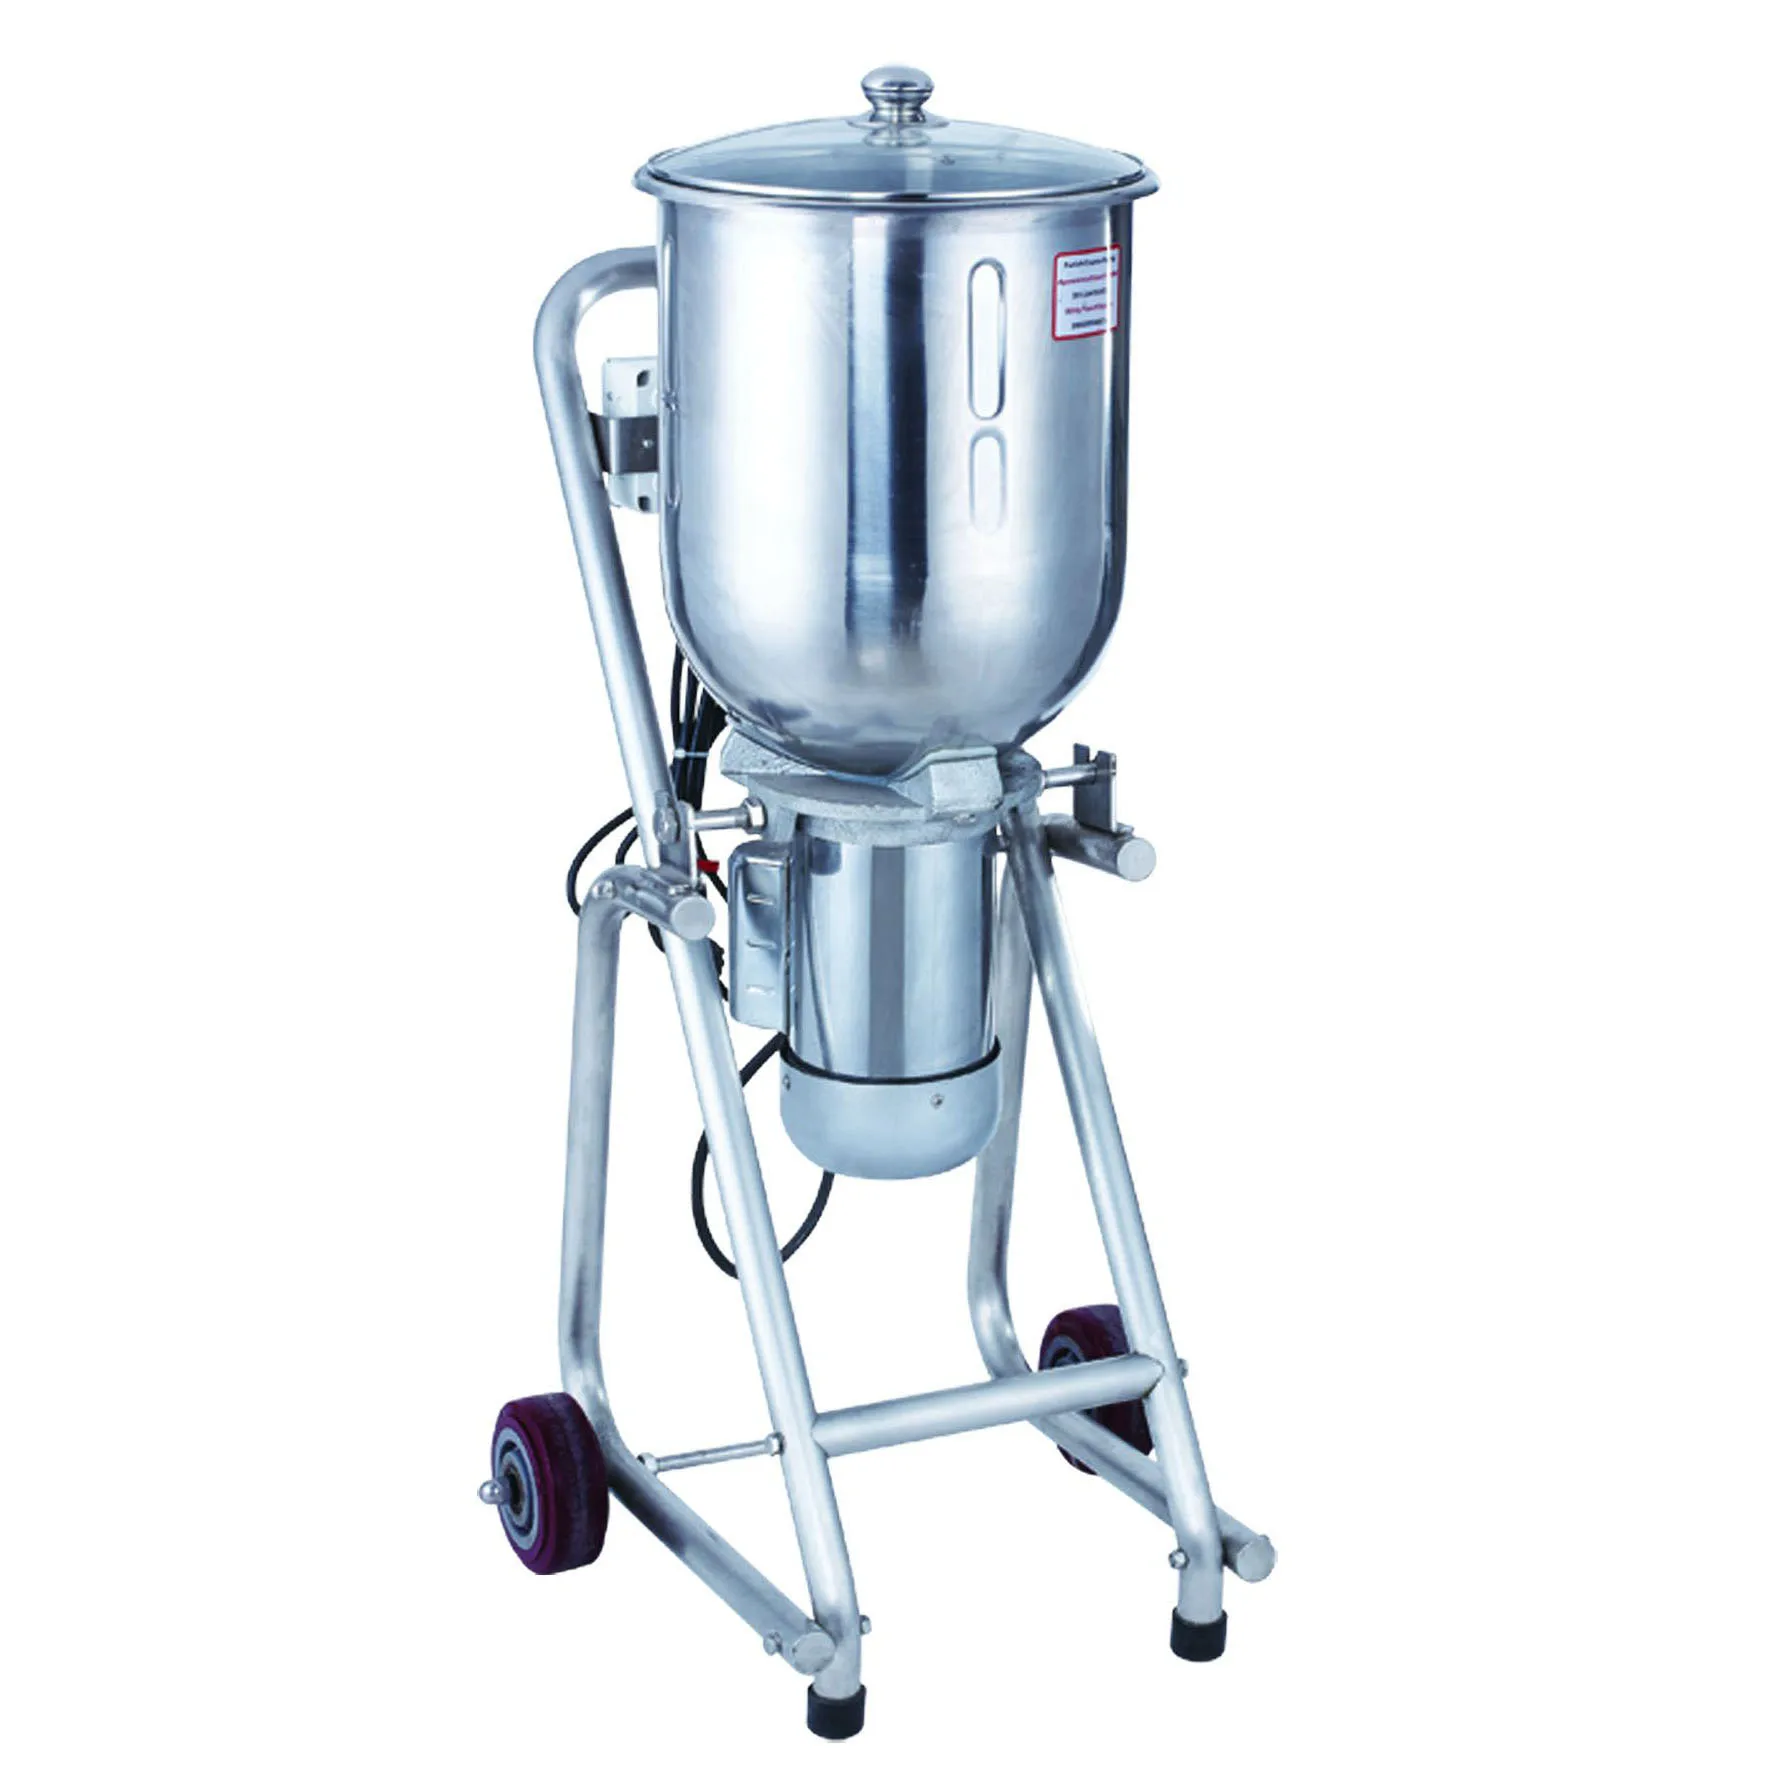 gave Cataract Som Source High quality 30L heavy duty Commercial ice Blender for fruit juice  smoothies factory price on m.alibaba.com